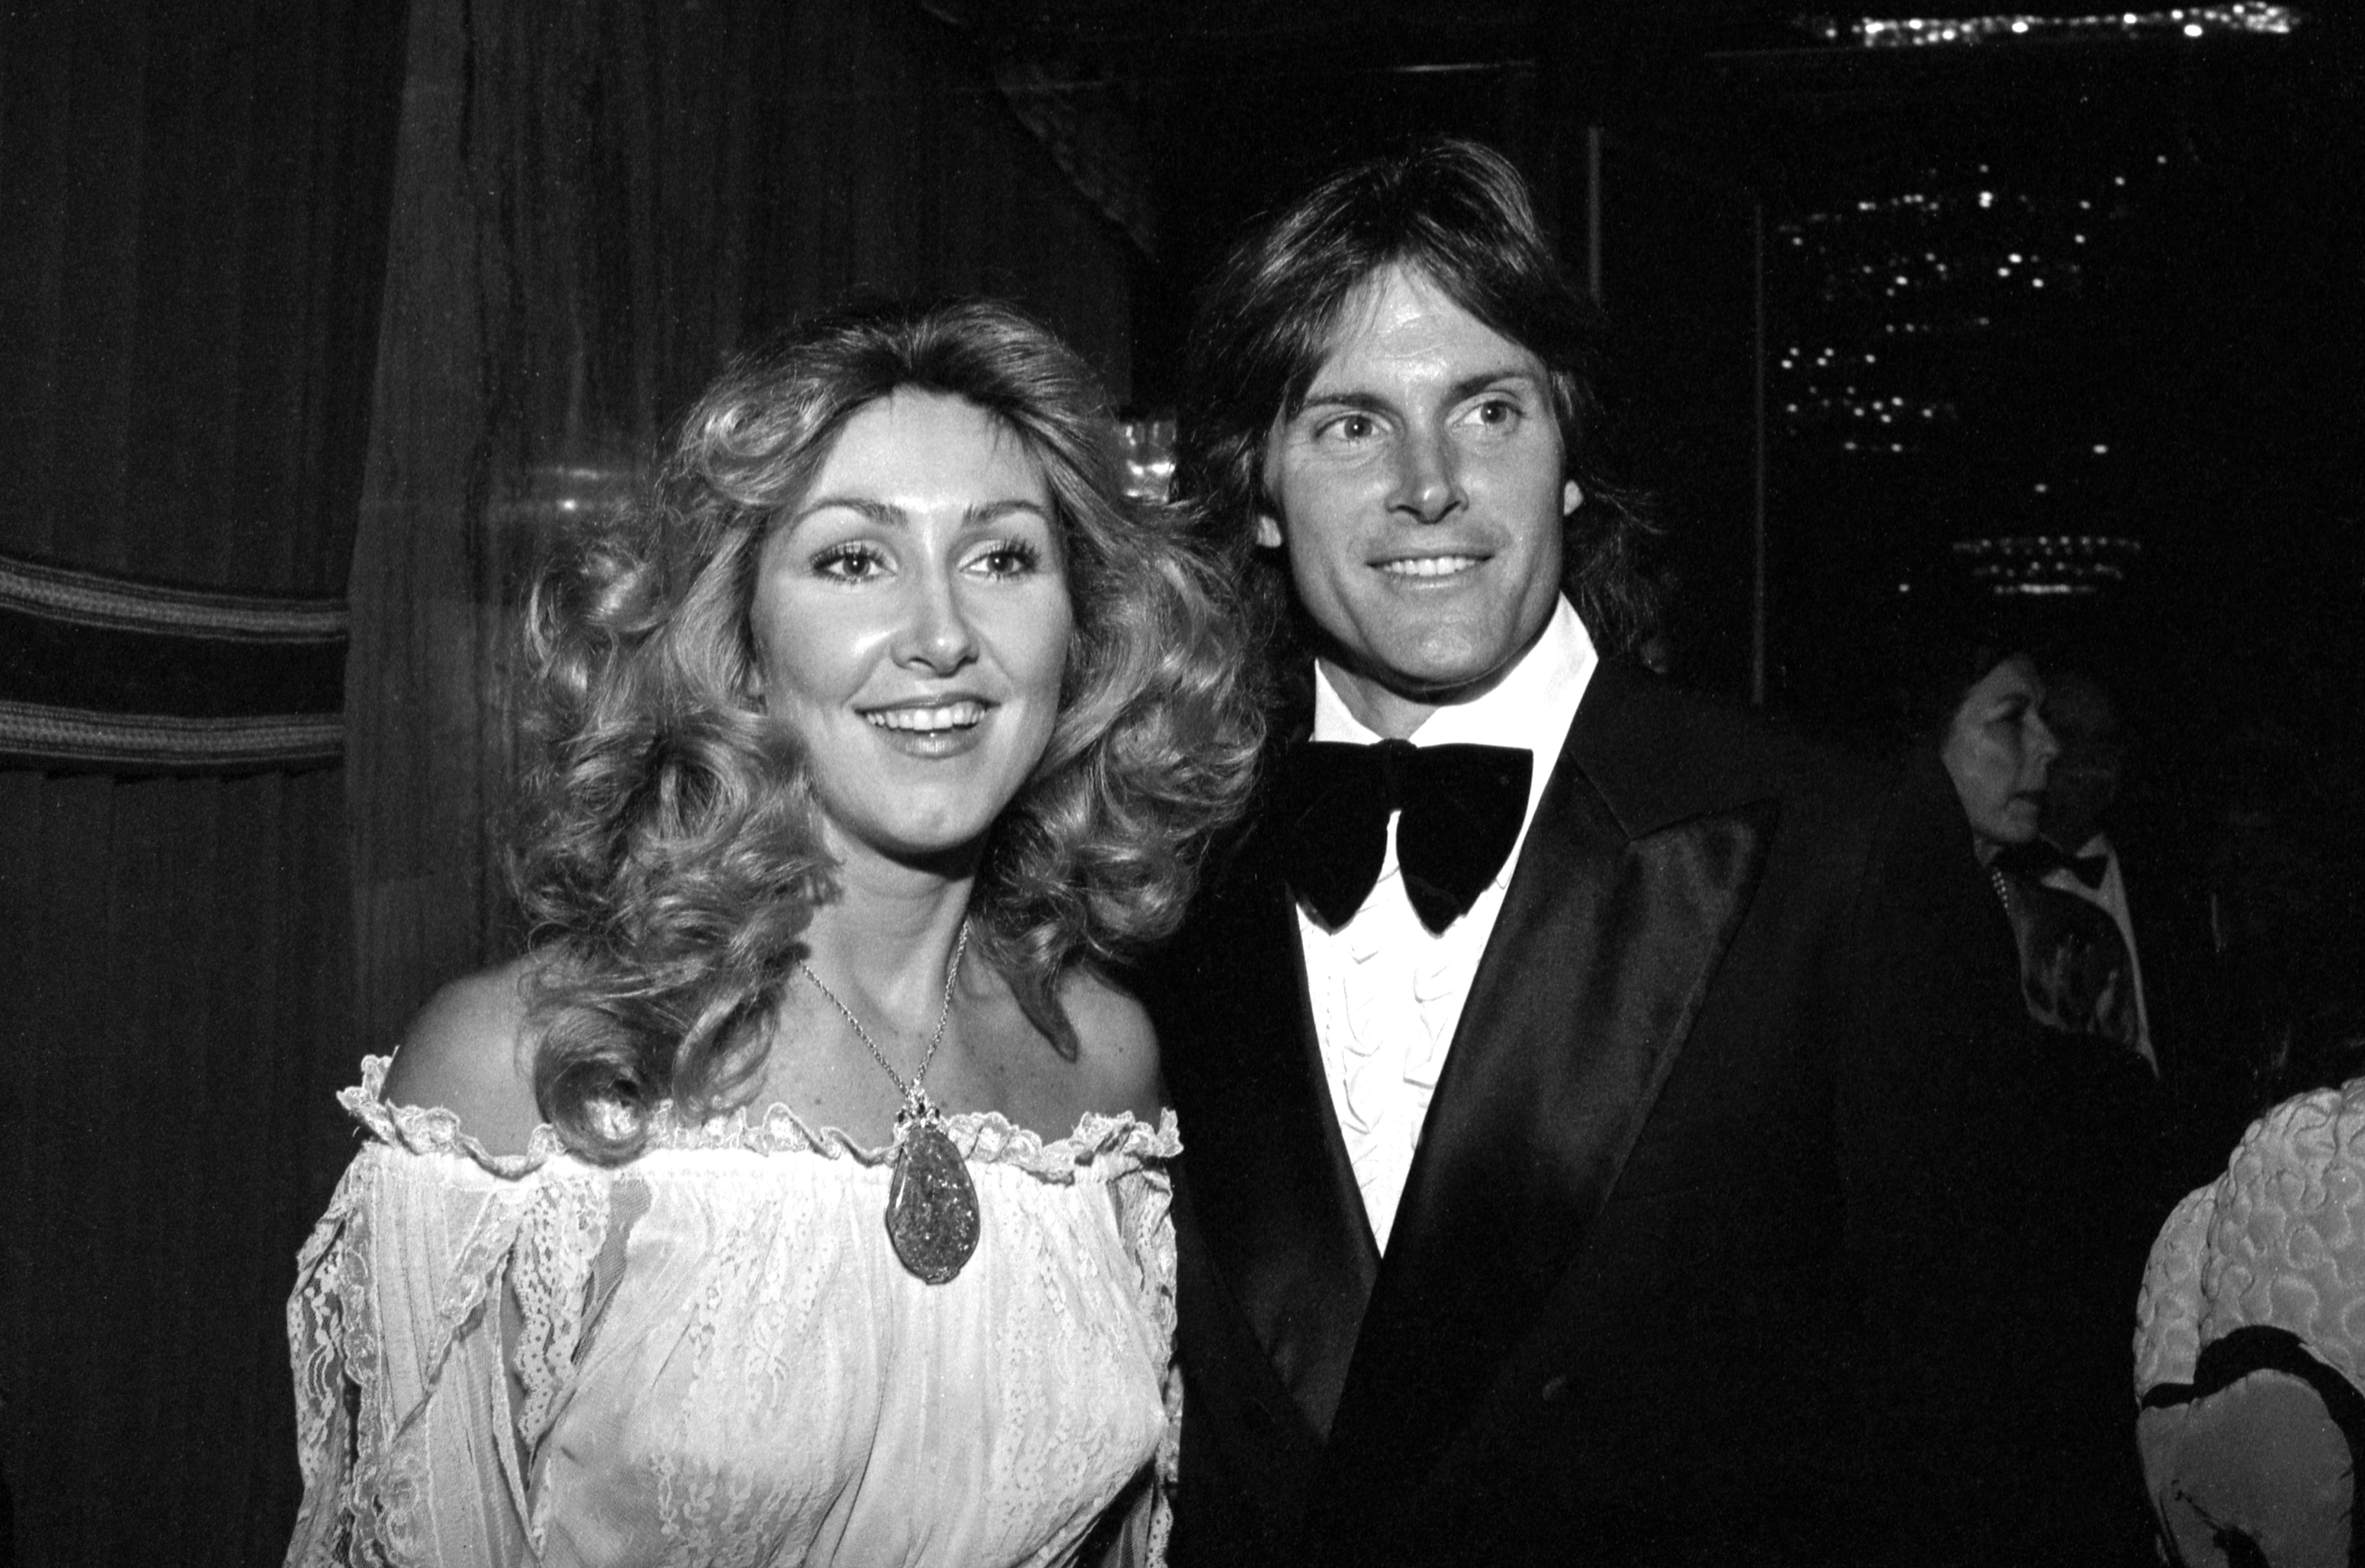 Linda Thompson and Bruce Jenner (before transitioning) posing in a black and white photograph in 1984 | Source: Getty Images